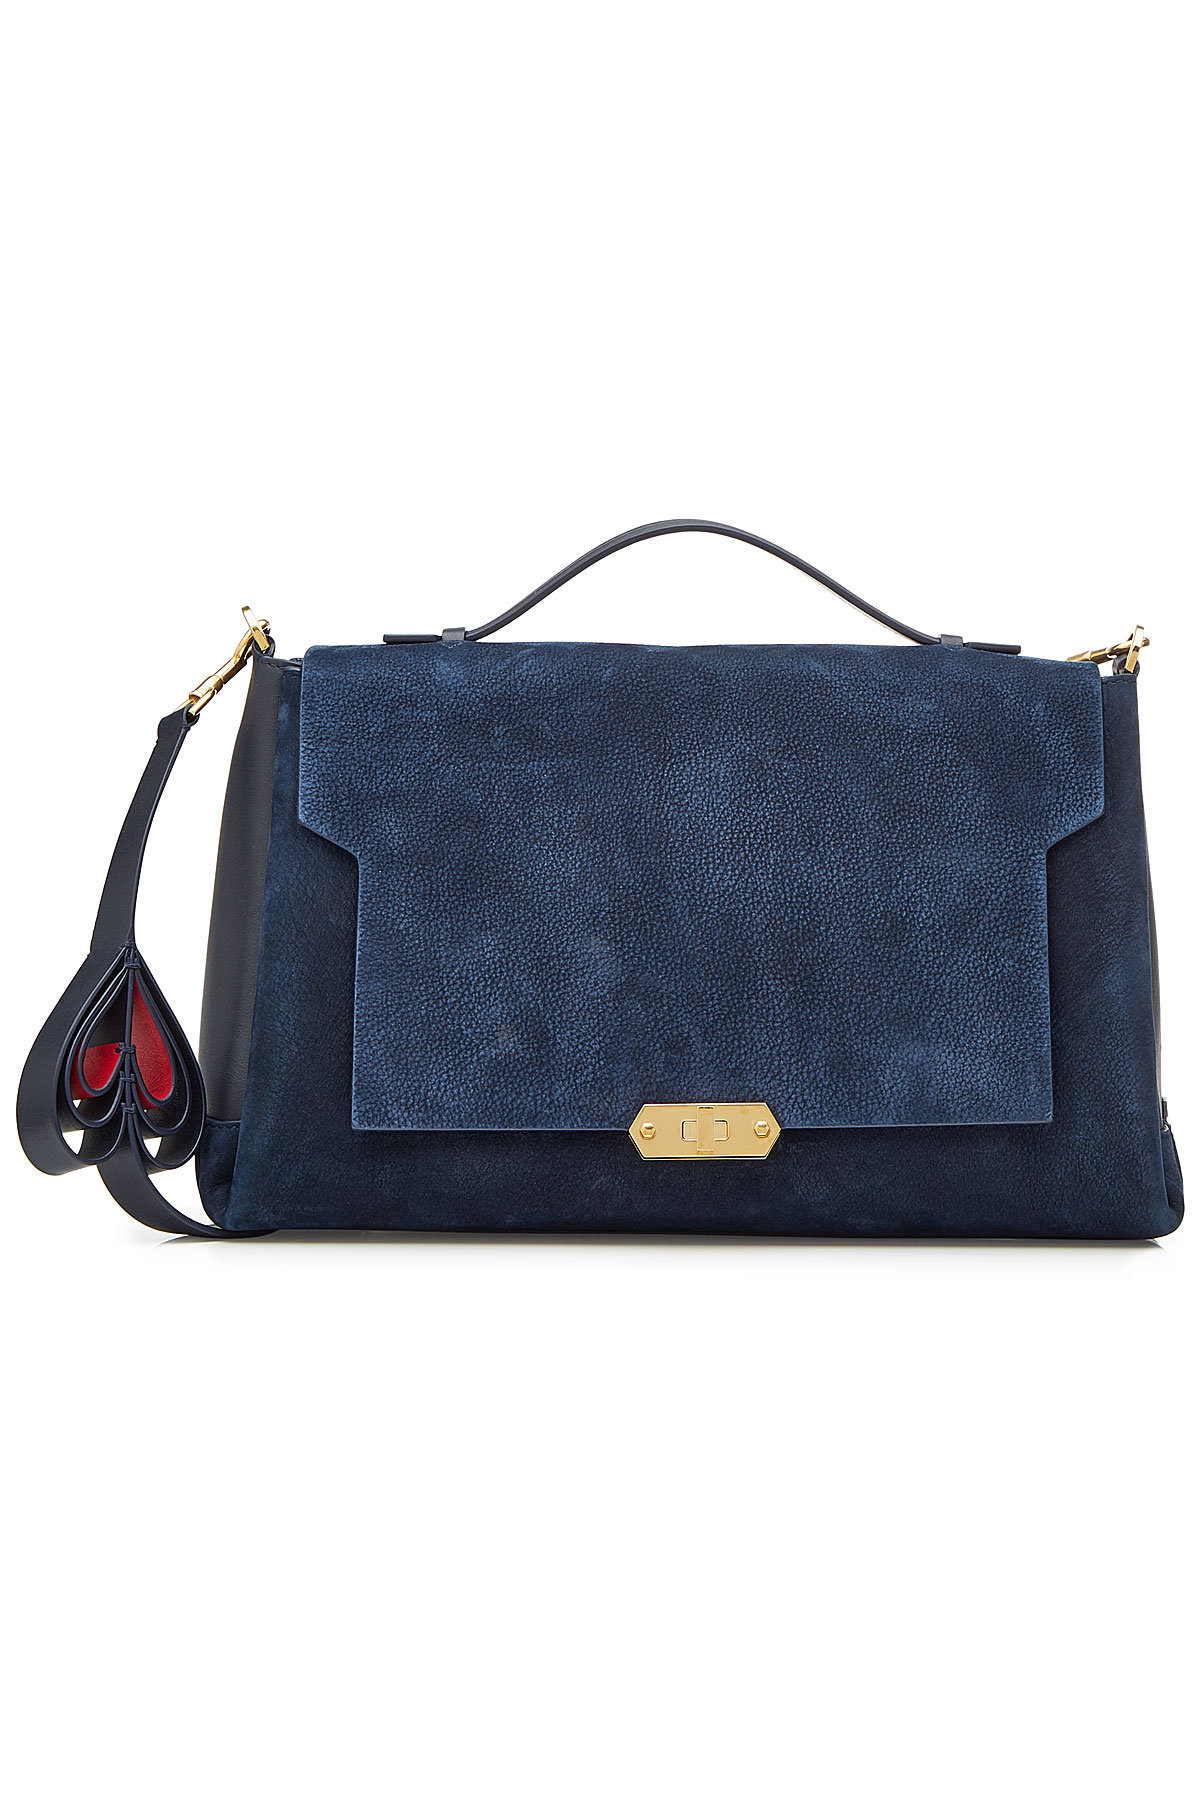 Anya Hindmarch - Bathurst Heart Suede Shoulder Bag with Leather